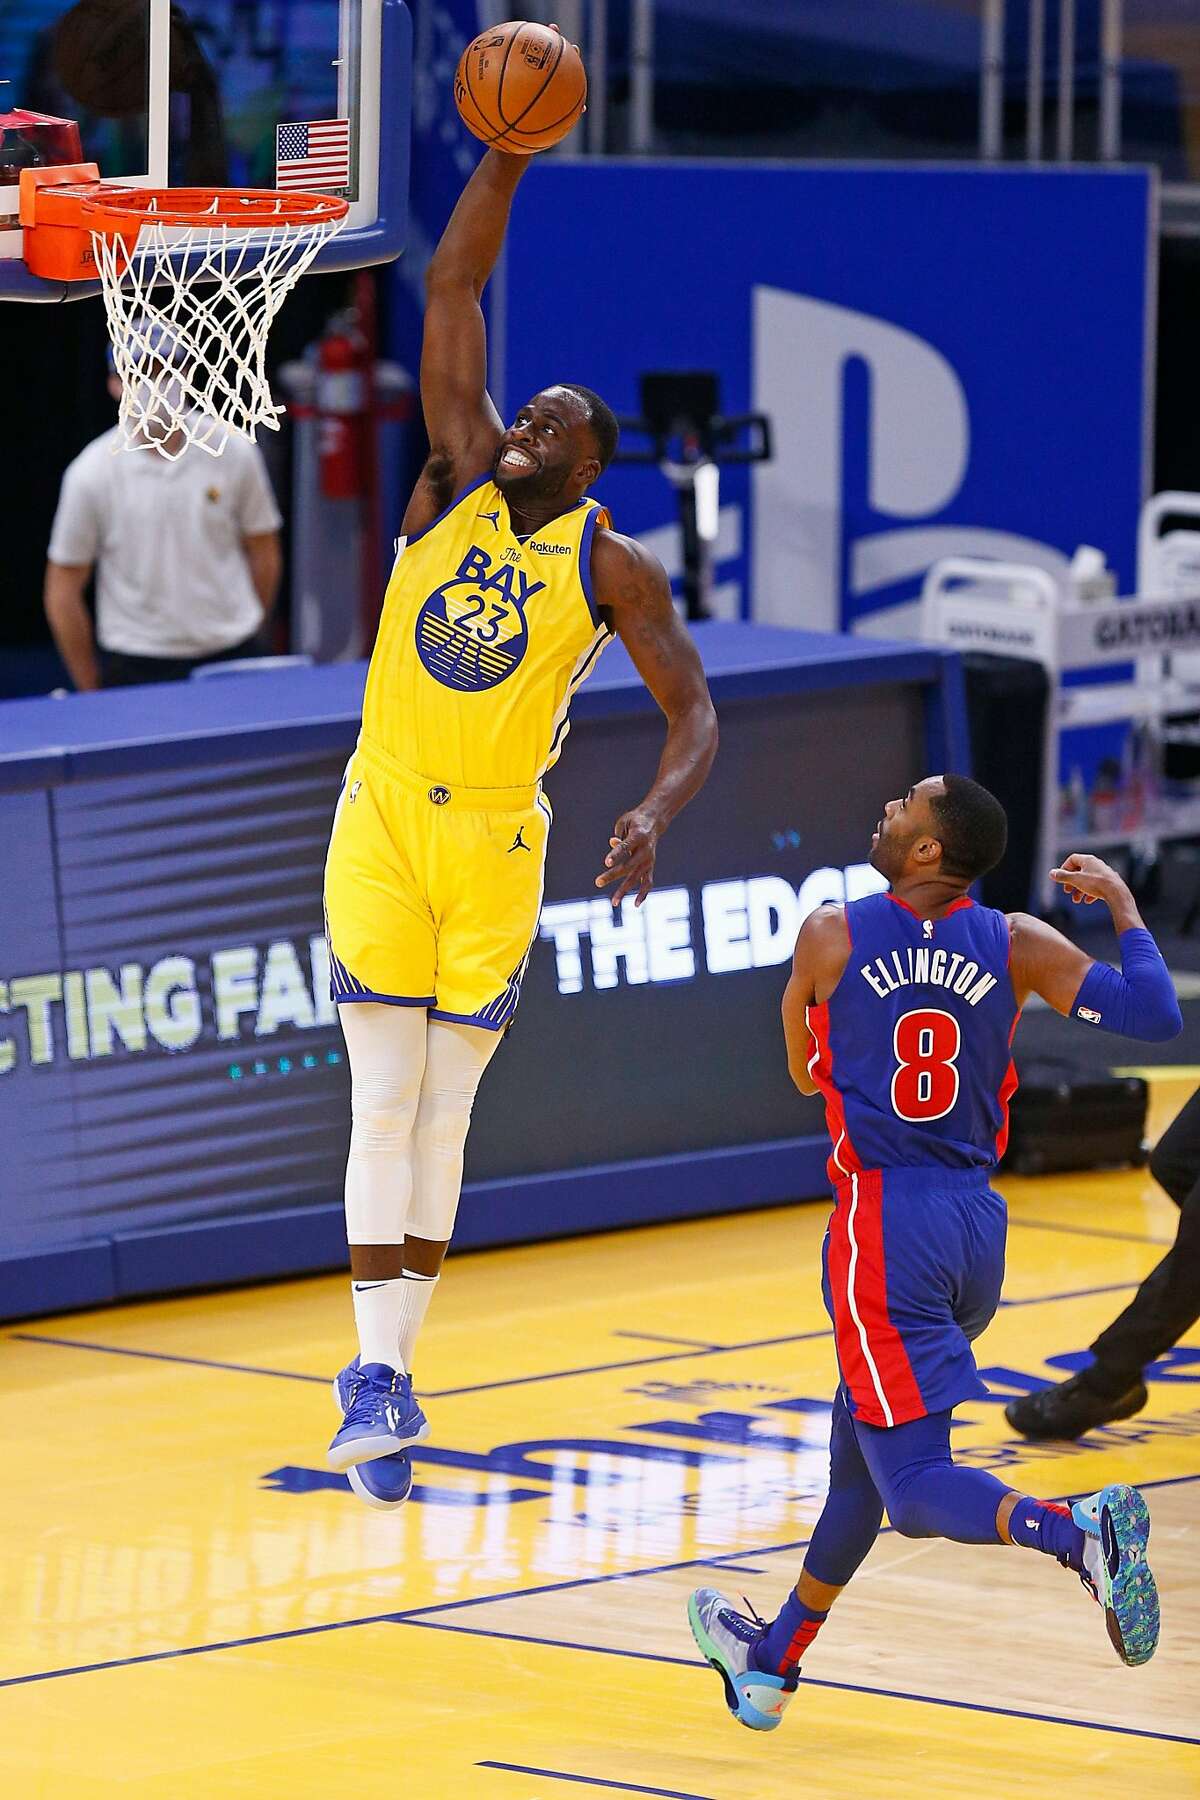 Golden State Warriors forward Draymond Green (23) dunks against Detroit Pistons guard Wayne Ellington (8) in the first period of an NBA game at Chase Center on Saturday, Jan. 30, 2021, in San Francisco, Calif.